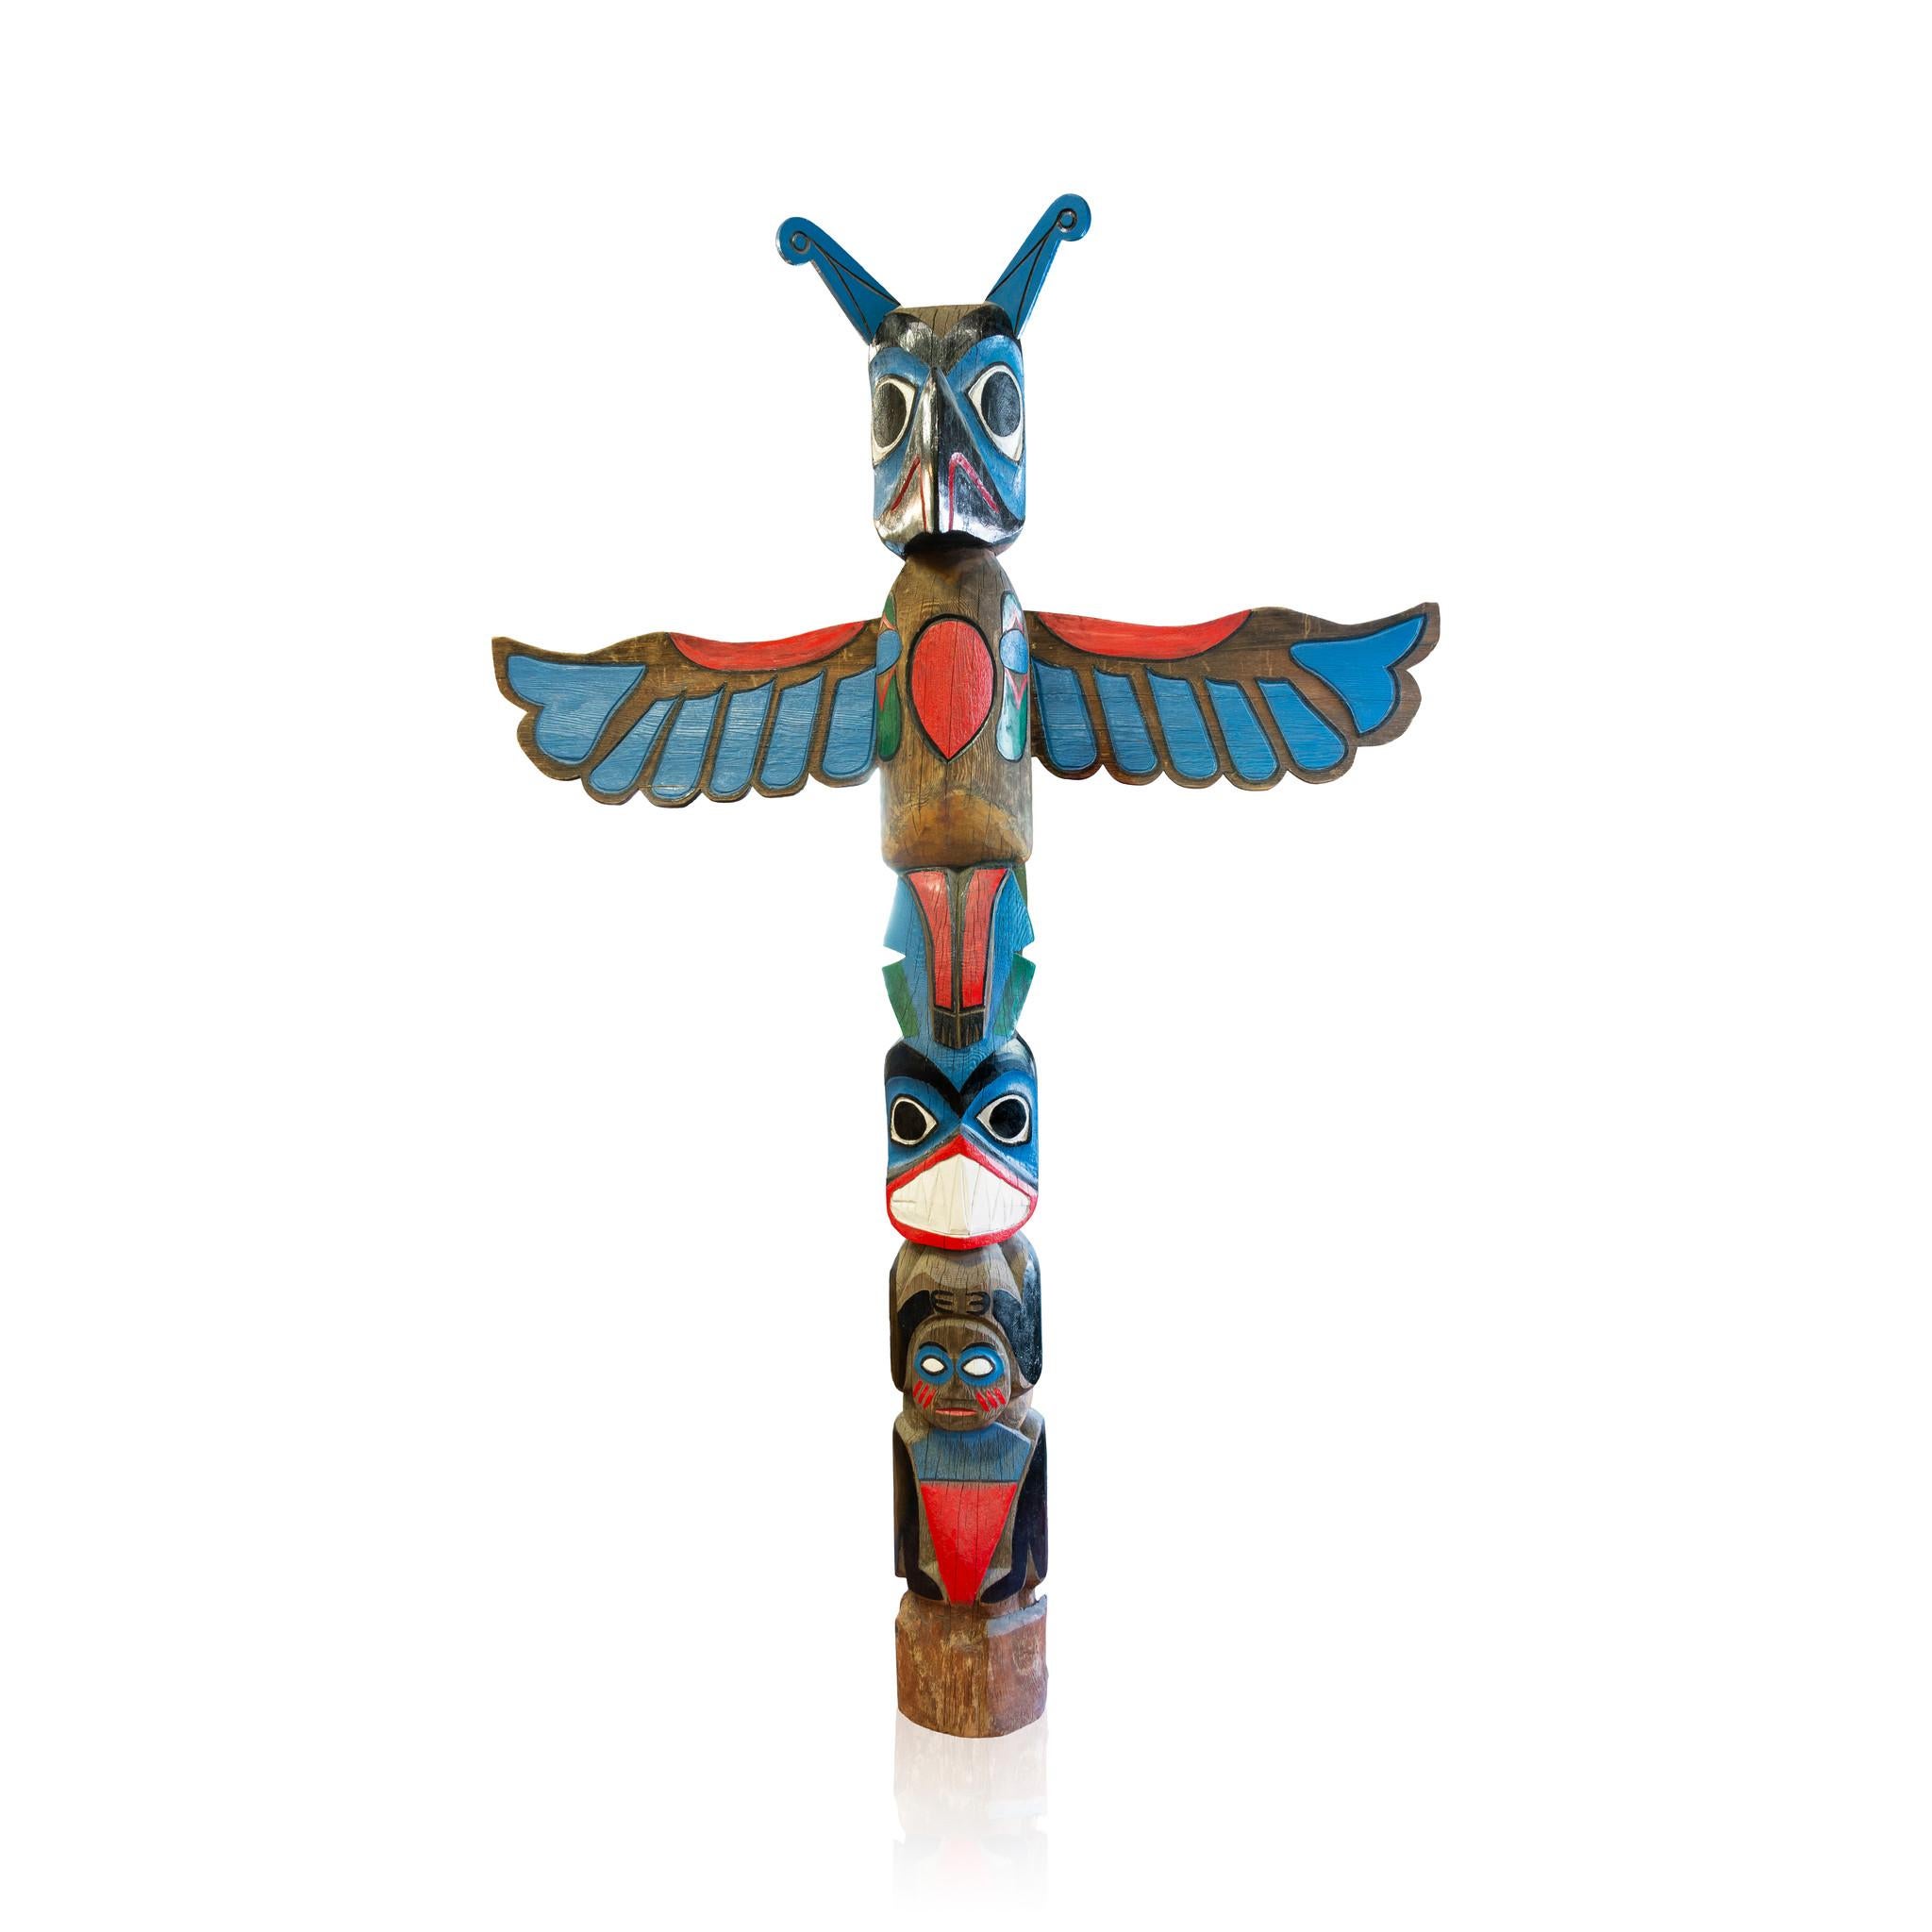 Mid-20th Century Large Tsimshian Thunderbird Totem Pole by George Mather Sr. For Sale